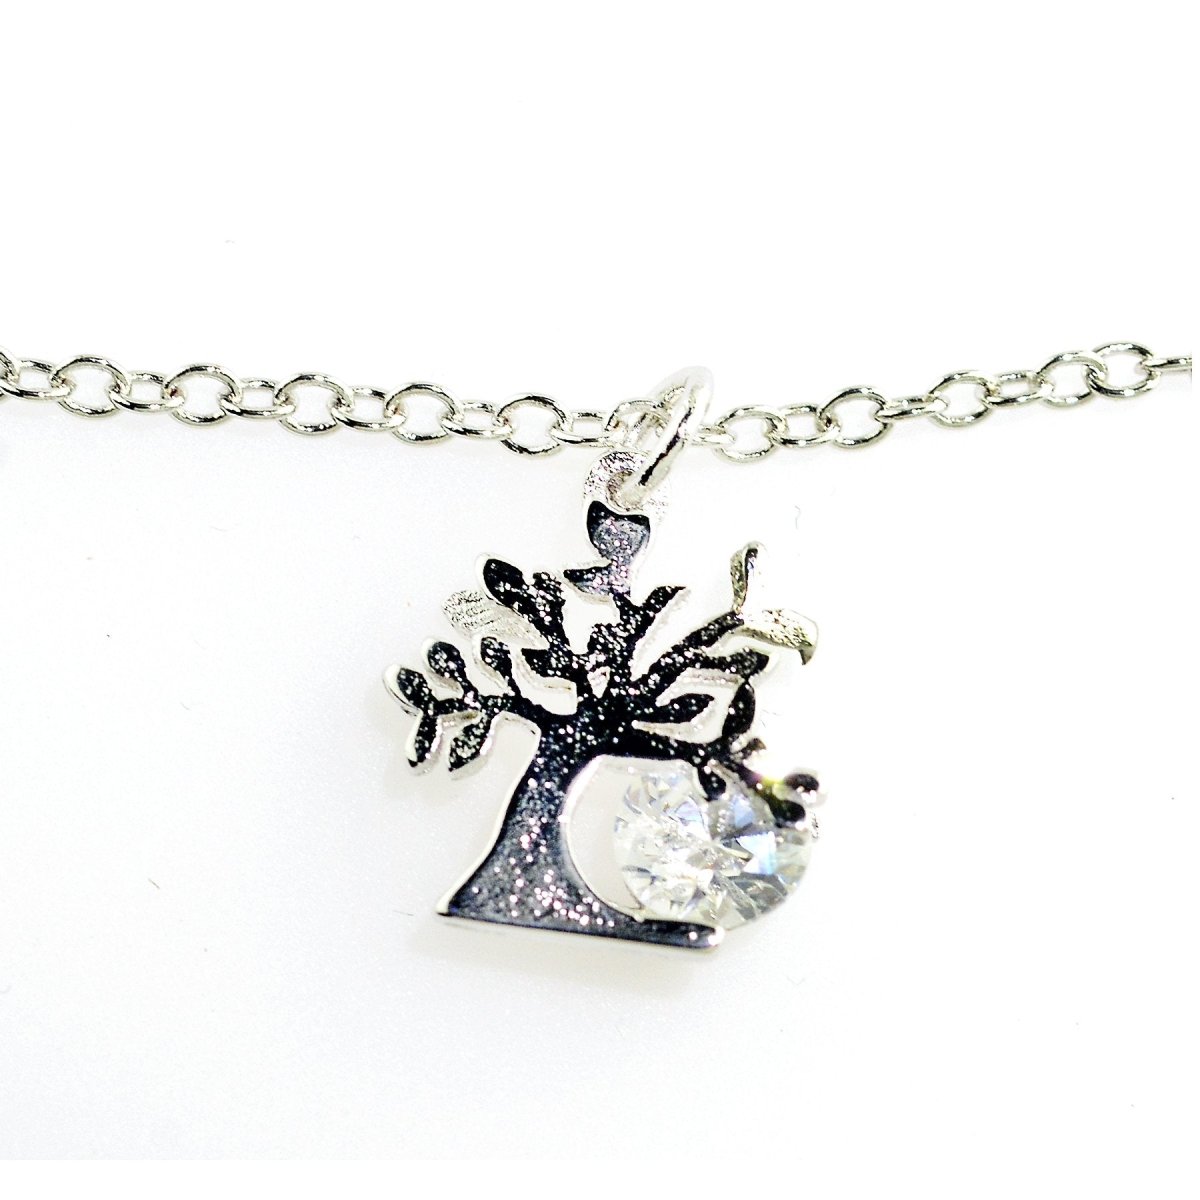 Life Tree of Life Necklace - Sweet Sentimental GiftsLife Tree of Life NecklaceNecklaceOrange EunostusSweet Sentimental GiftsNK101Life Tree of Life Necklace582918787742